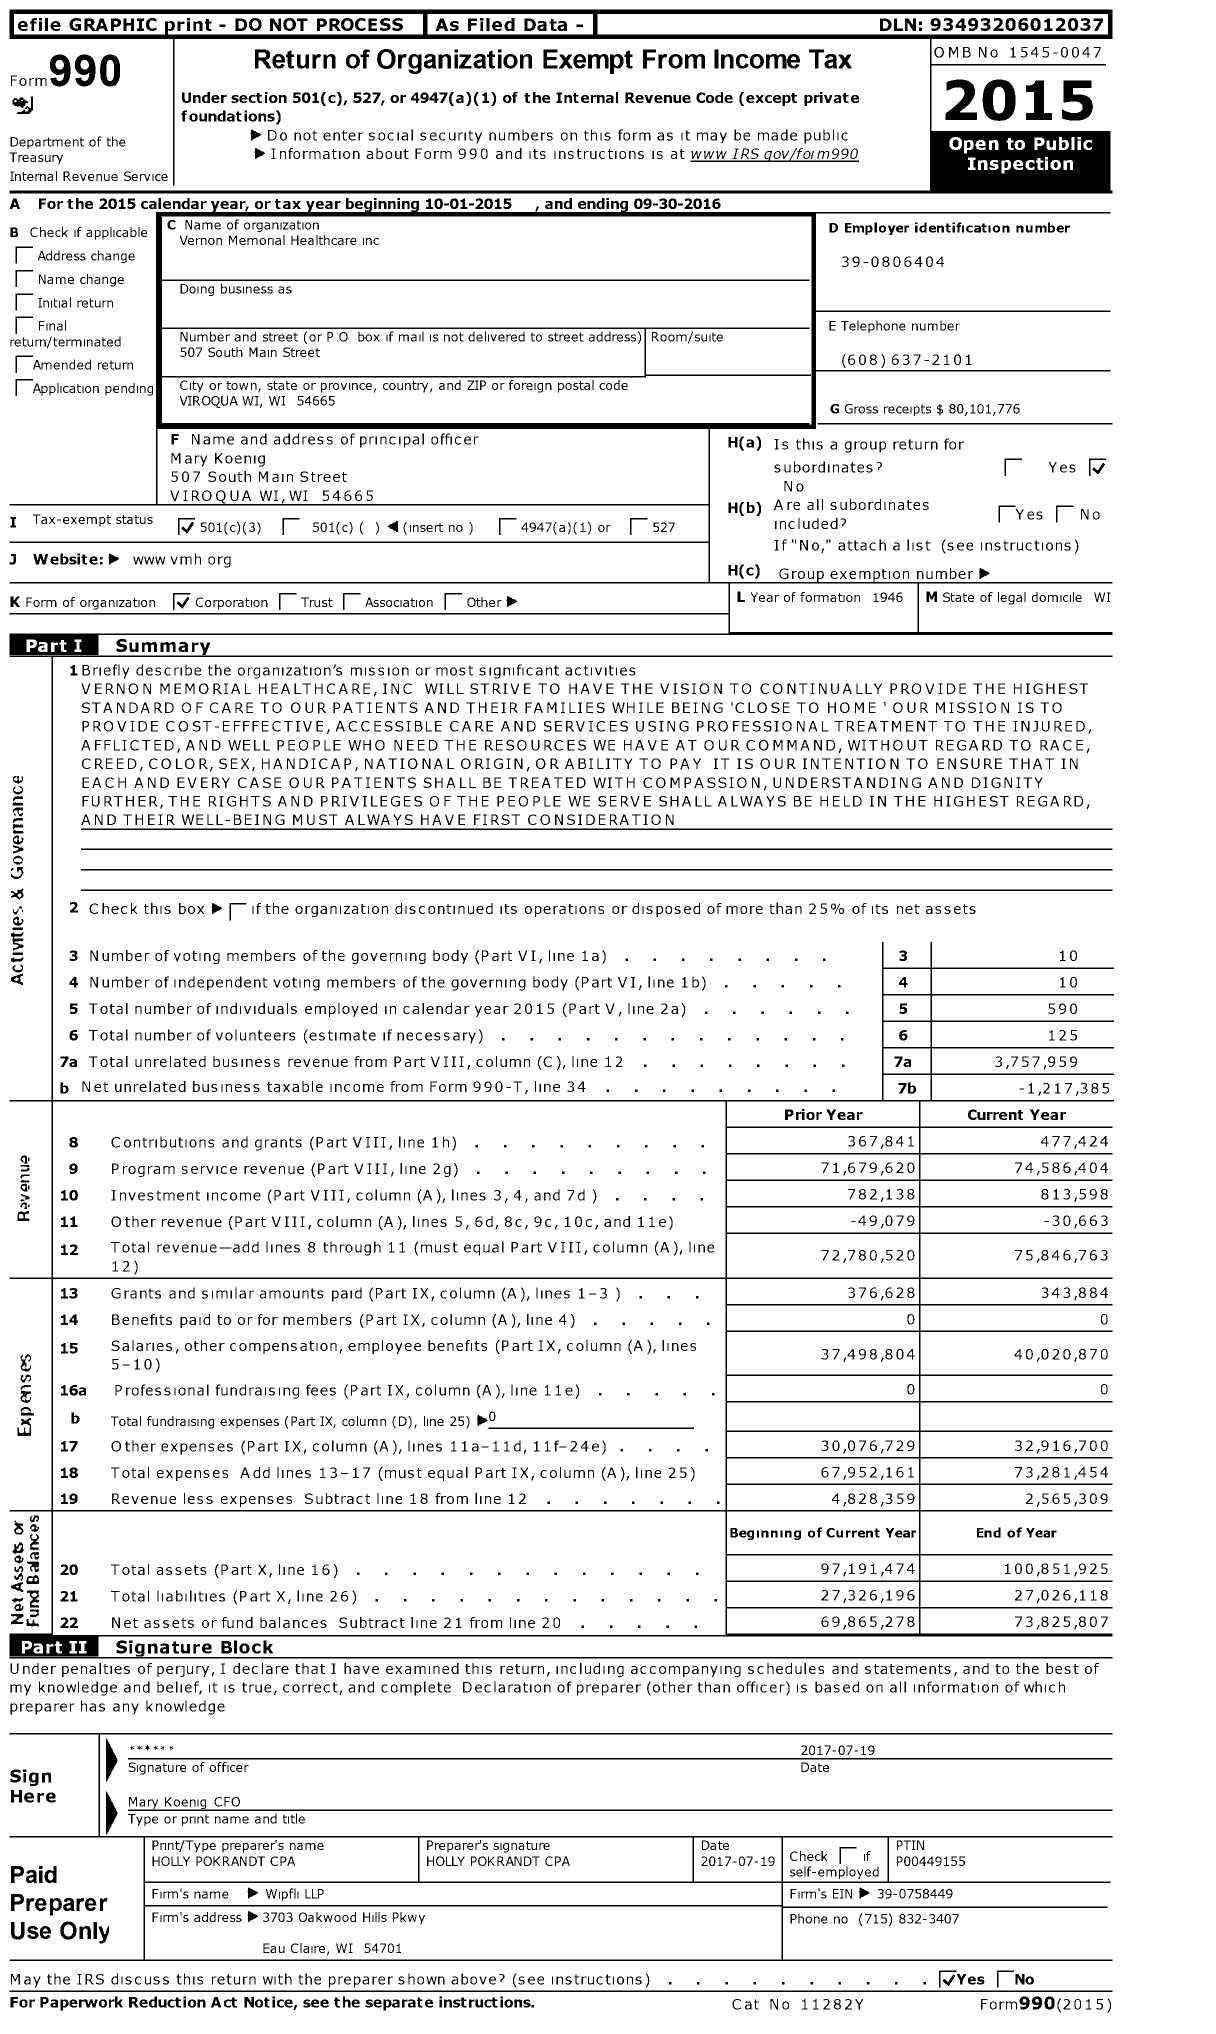 Image of first page of 2015 Form 990 for Vernon Memorial Healthcare (VMH)